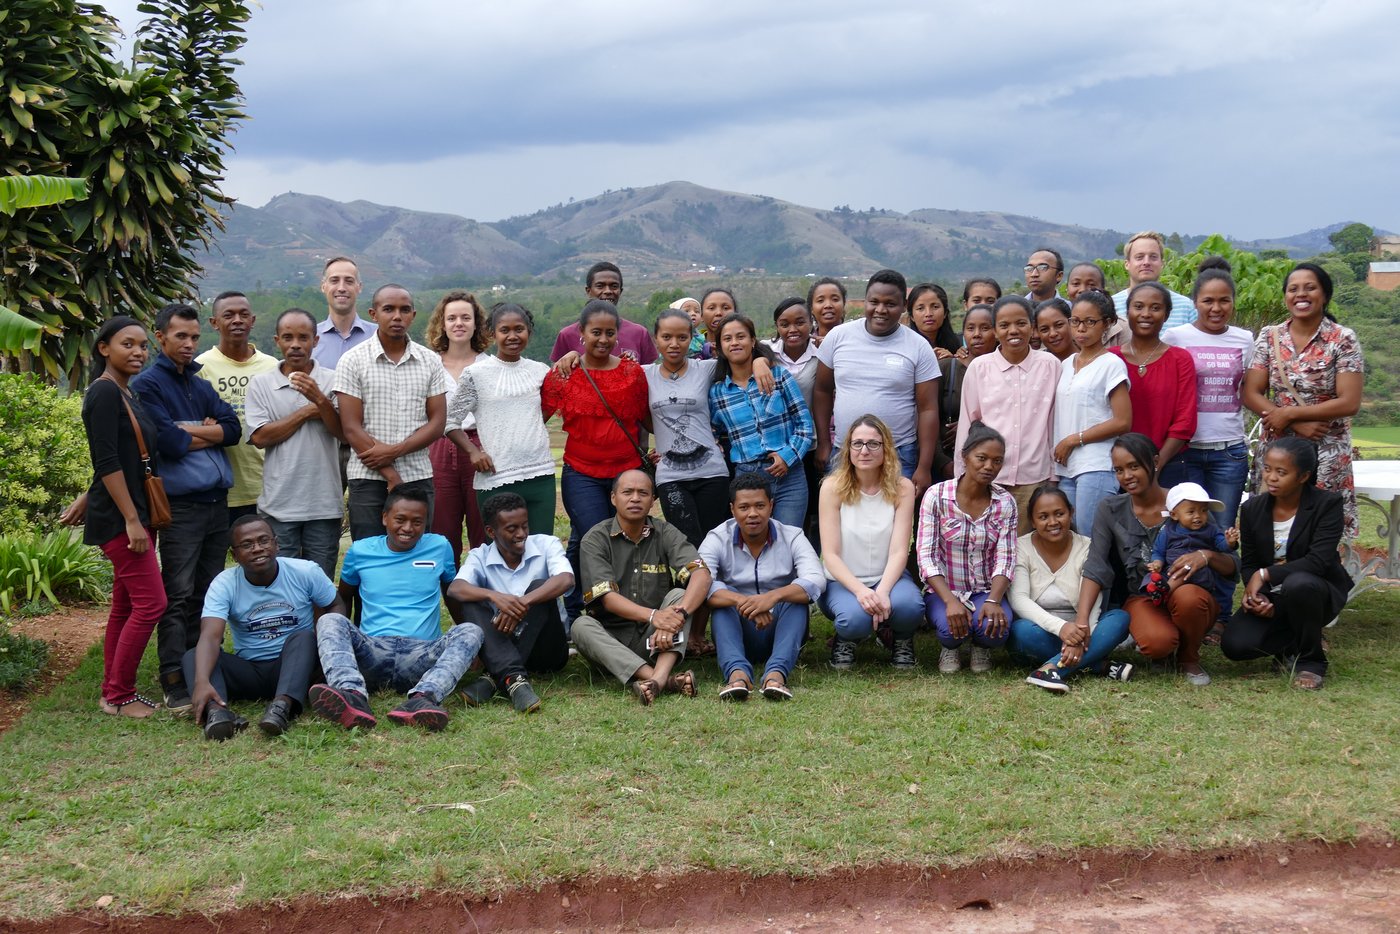 A group of people from Europe and Madagascar standing or squatting together for a group photo outside in nature. They look friendly towards the viewer.